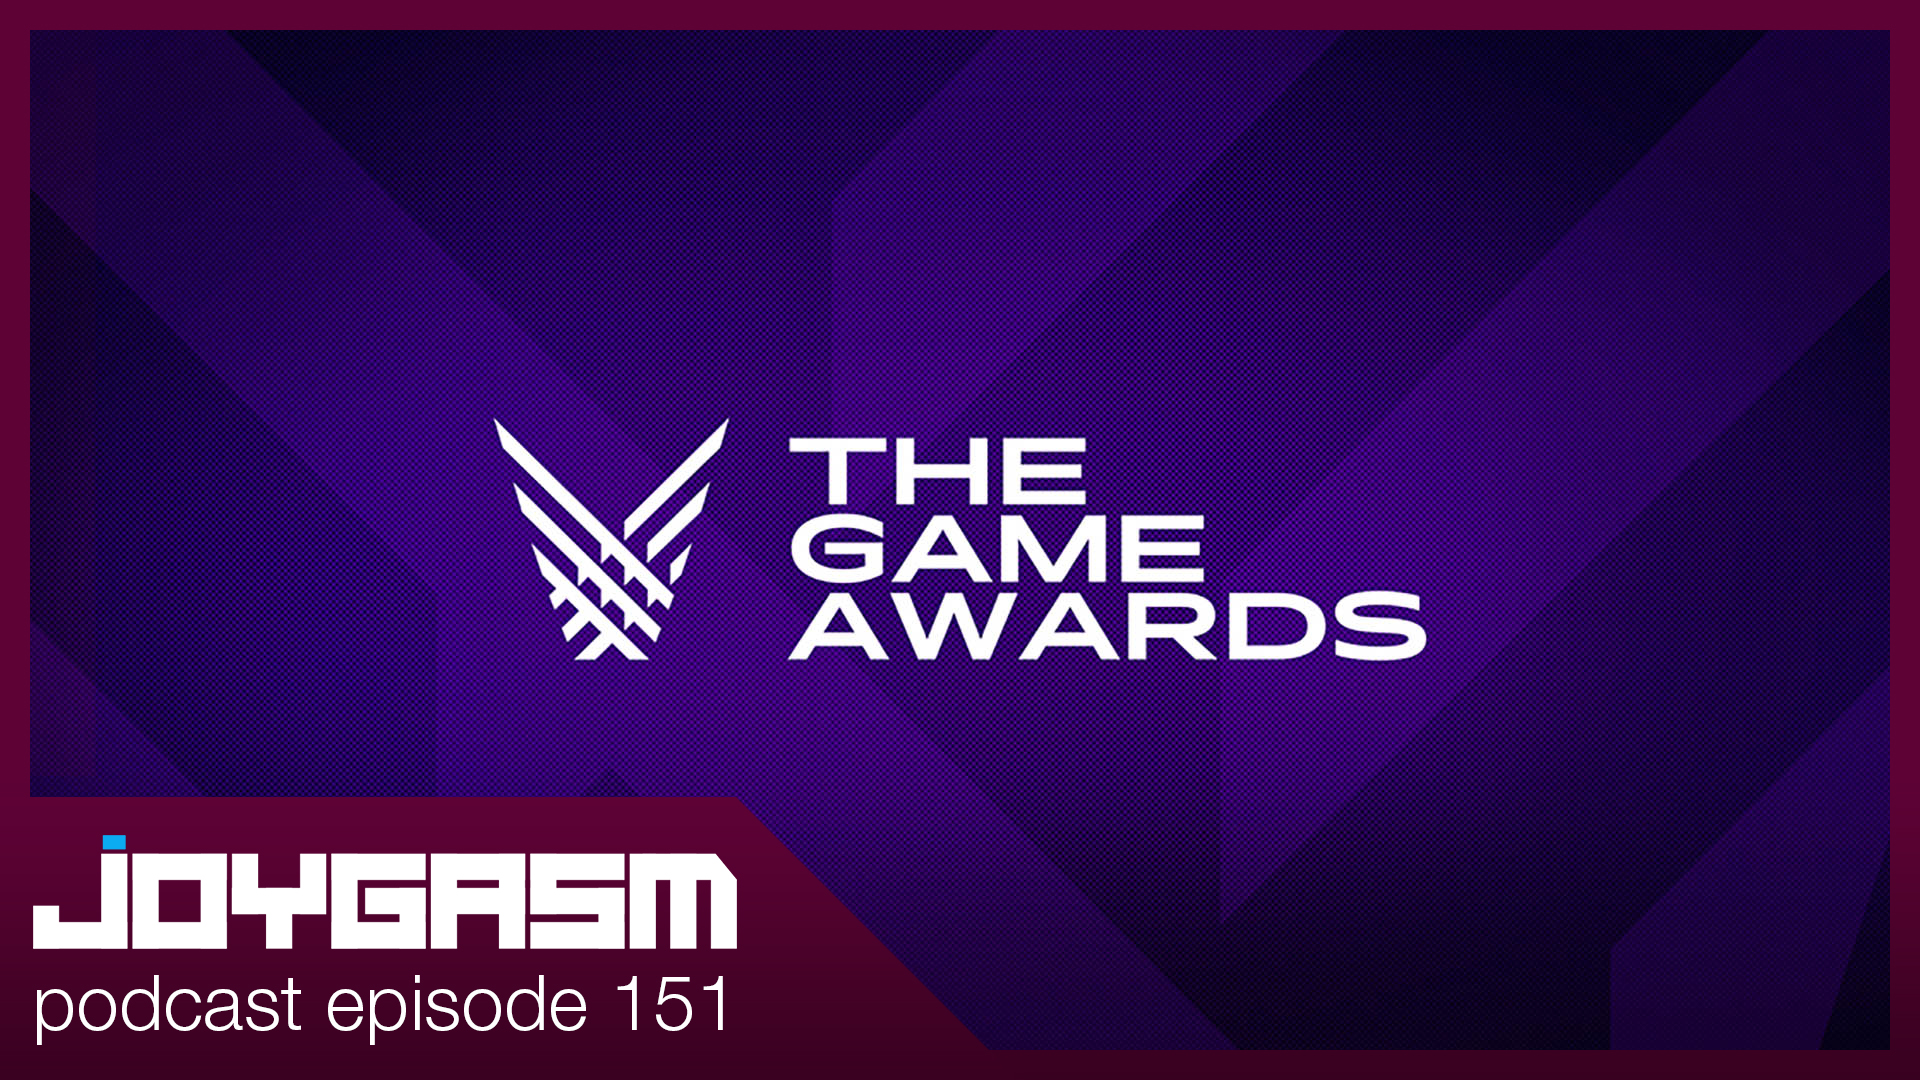 Ep. 151: The Game Awards & Our Favorite Games of 2019